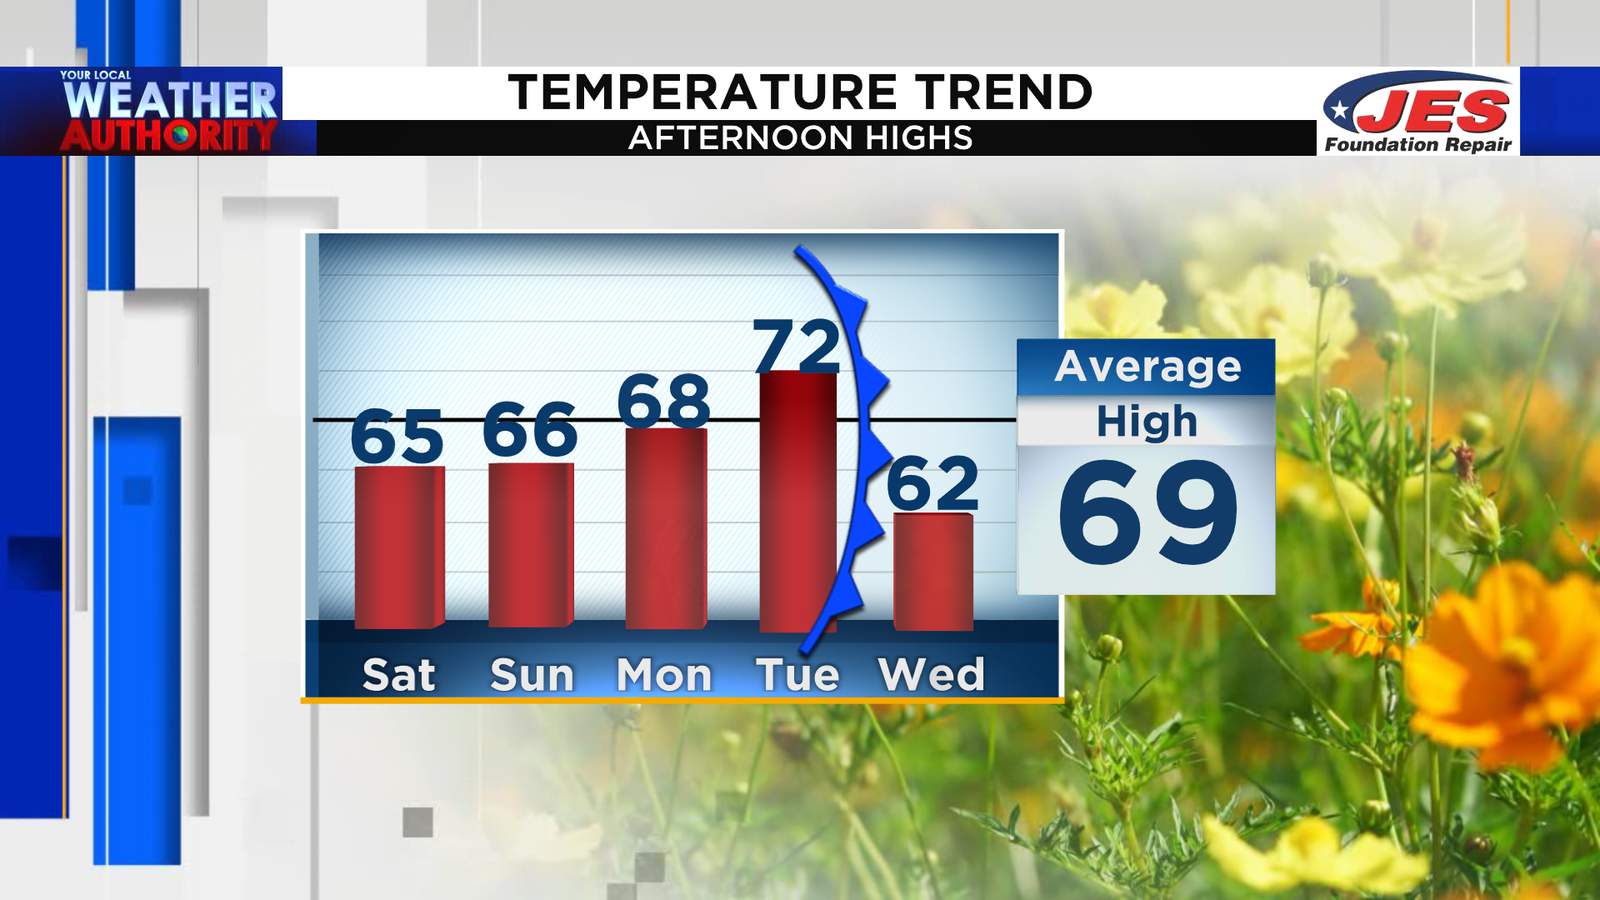 Near-to-below average temperatures before a mid-week cold front